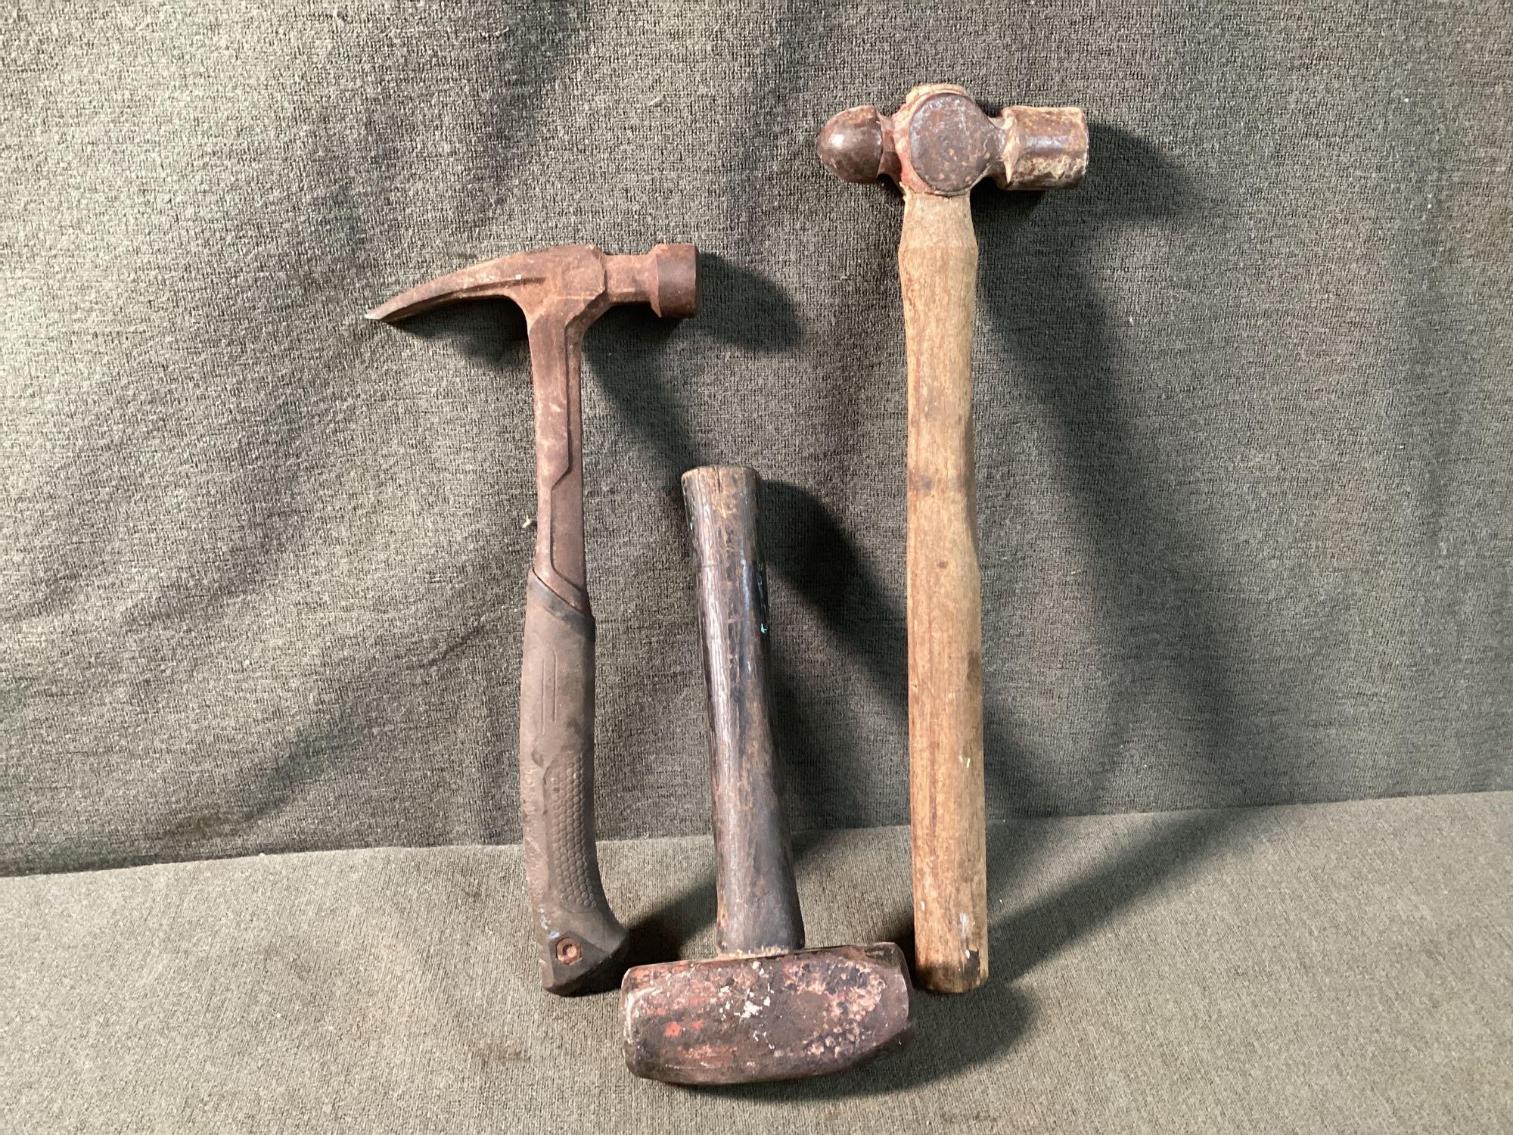 Image for Hammers